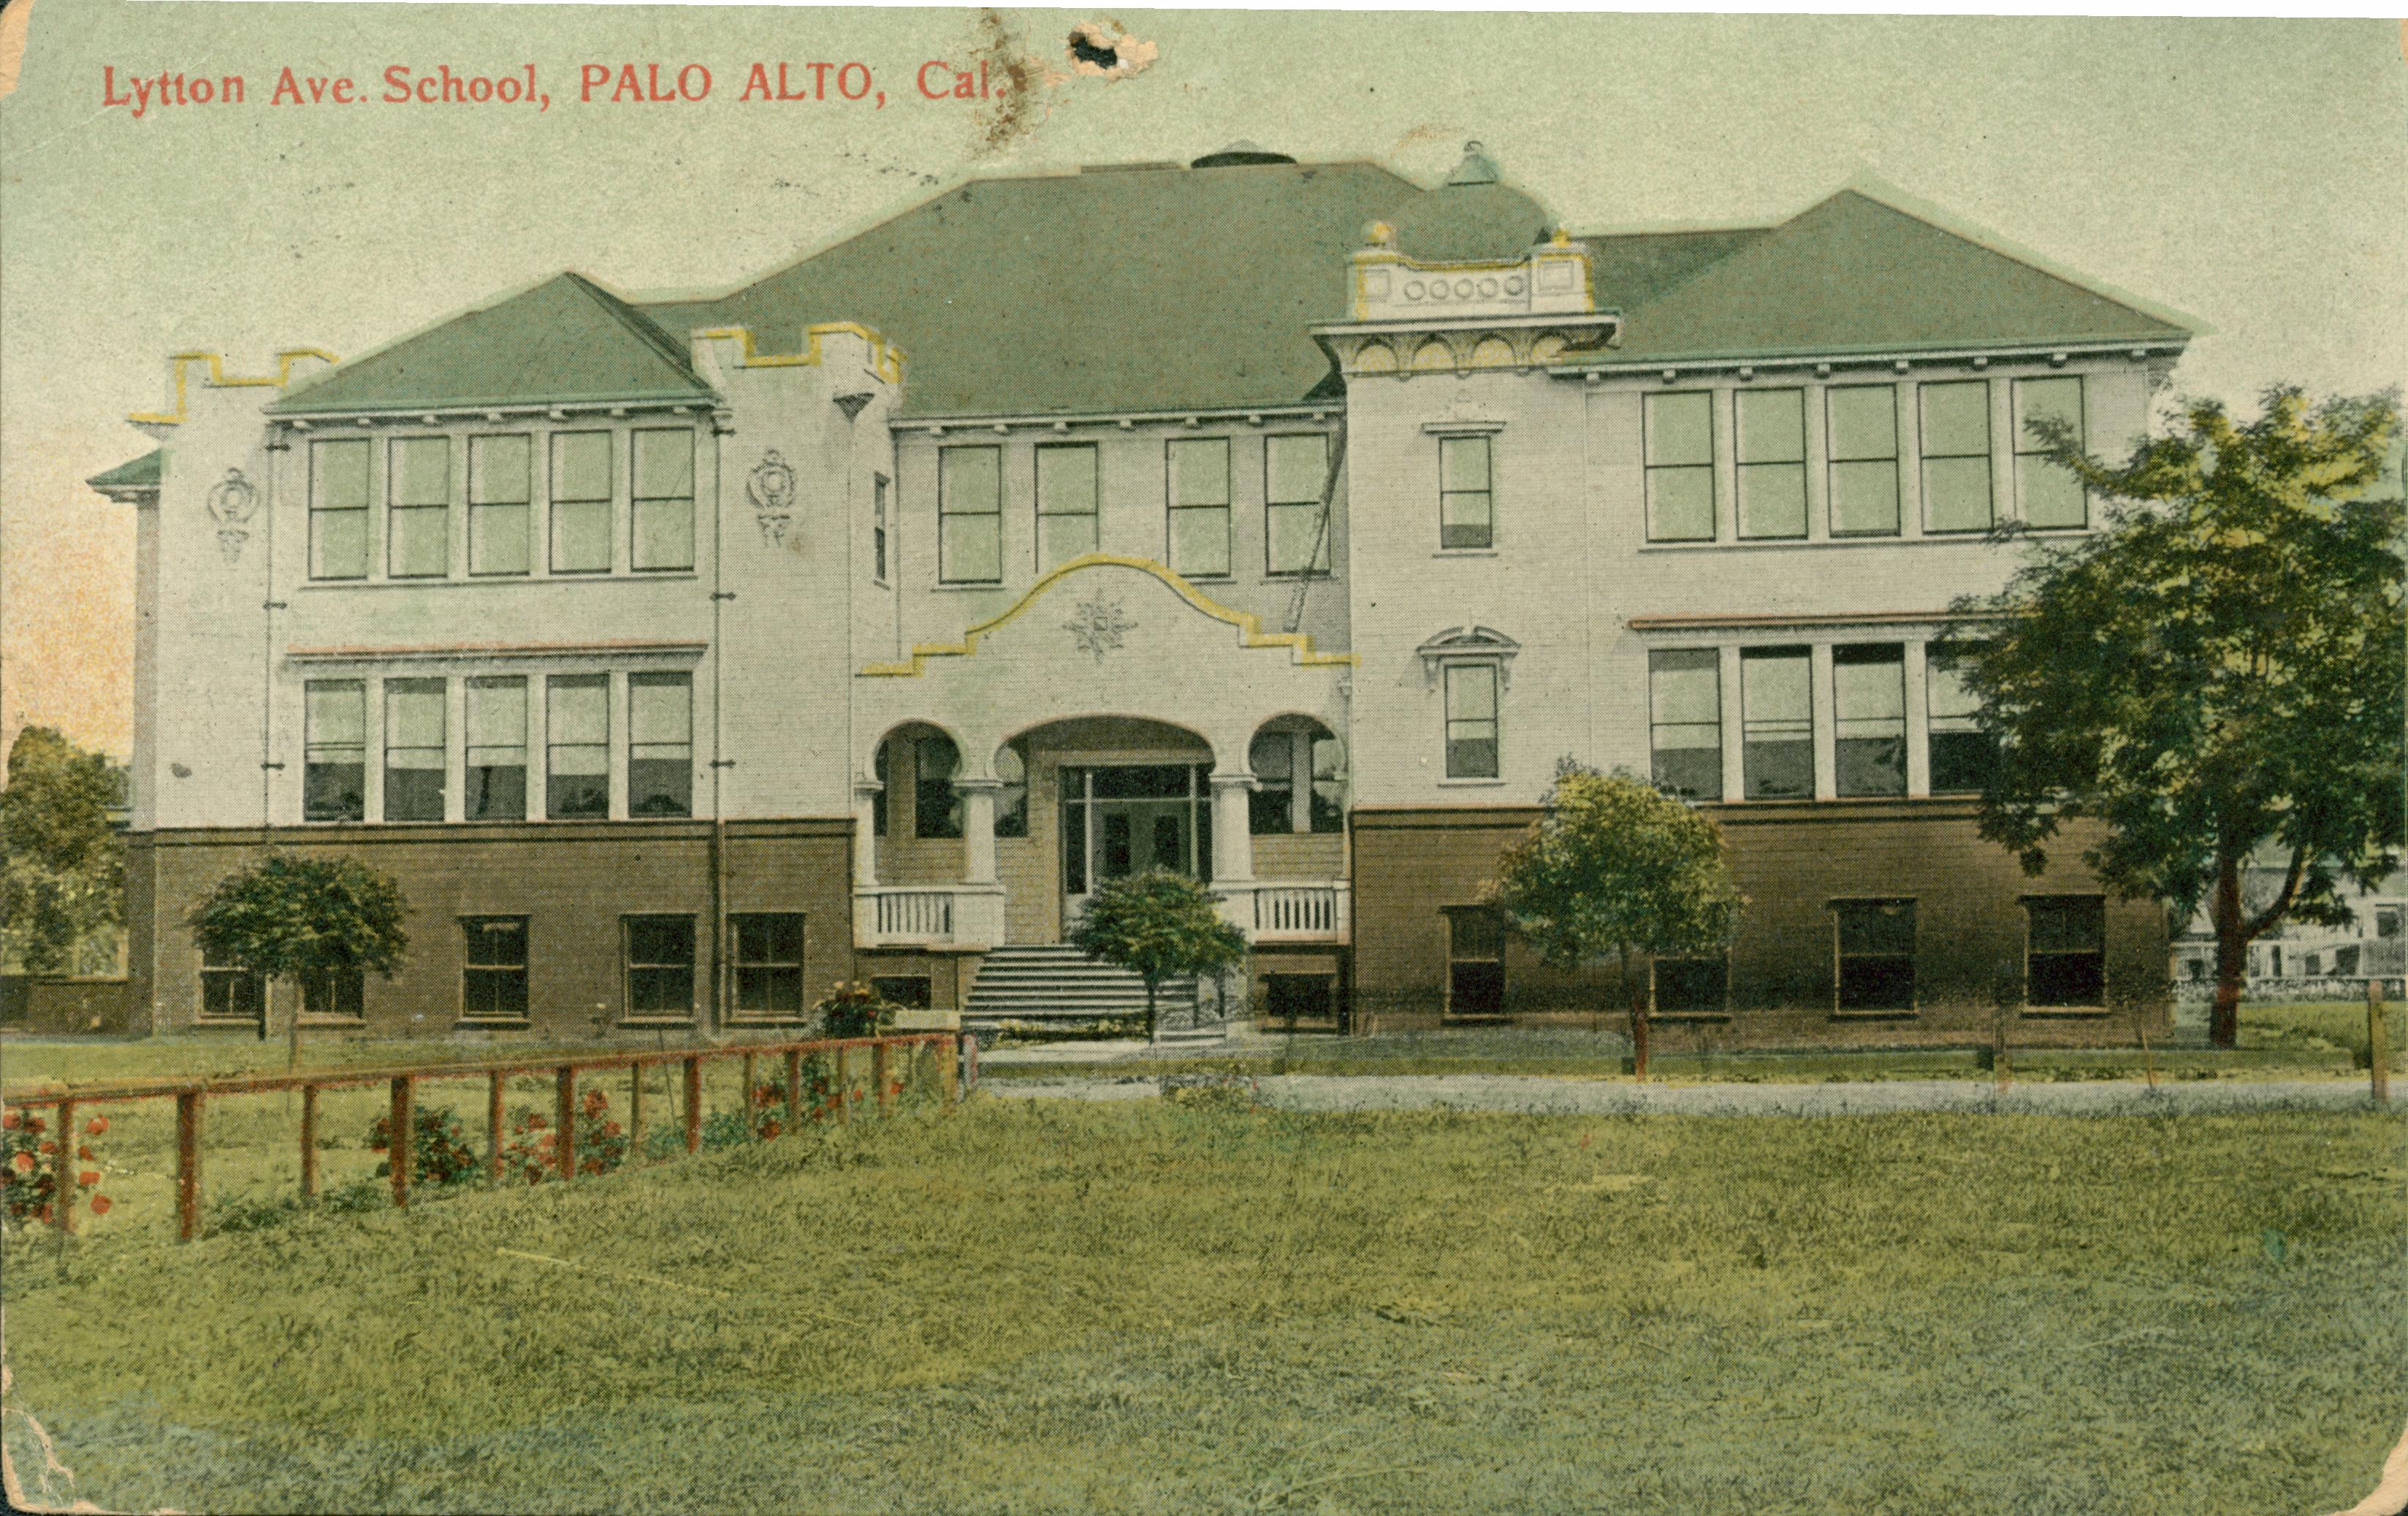 Exterior view of Lytton Ave. School, large lawn and trees bordering the school, fence down the center of the lawn with flowering bushes, driveway separating grass area from building